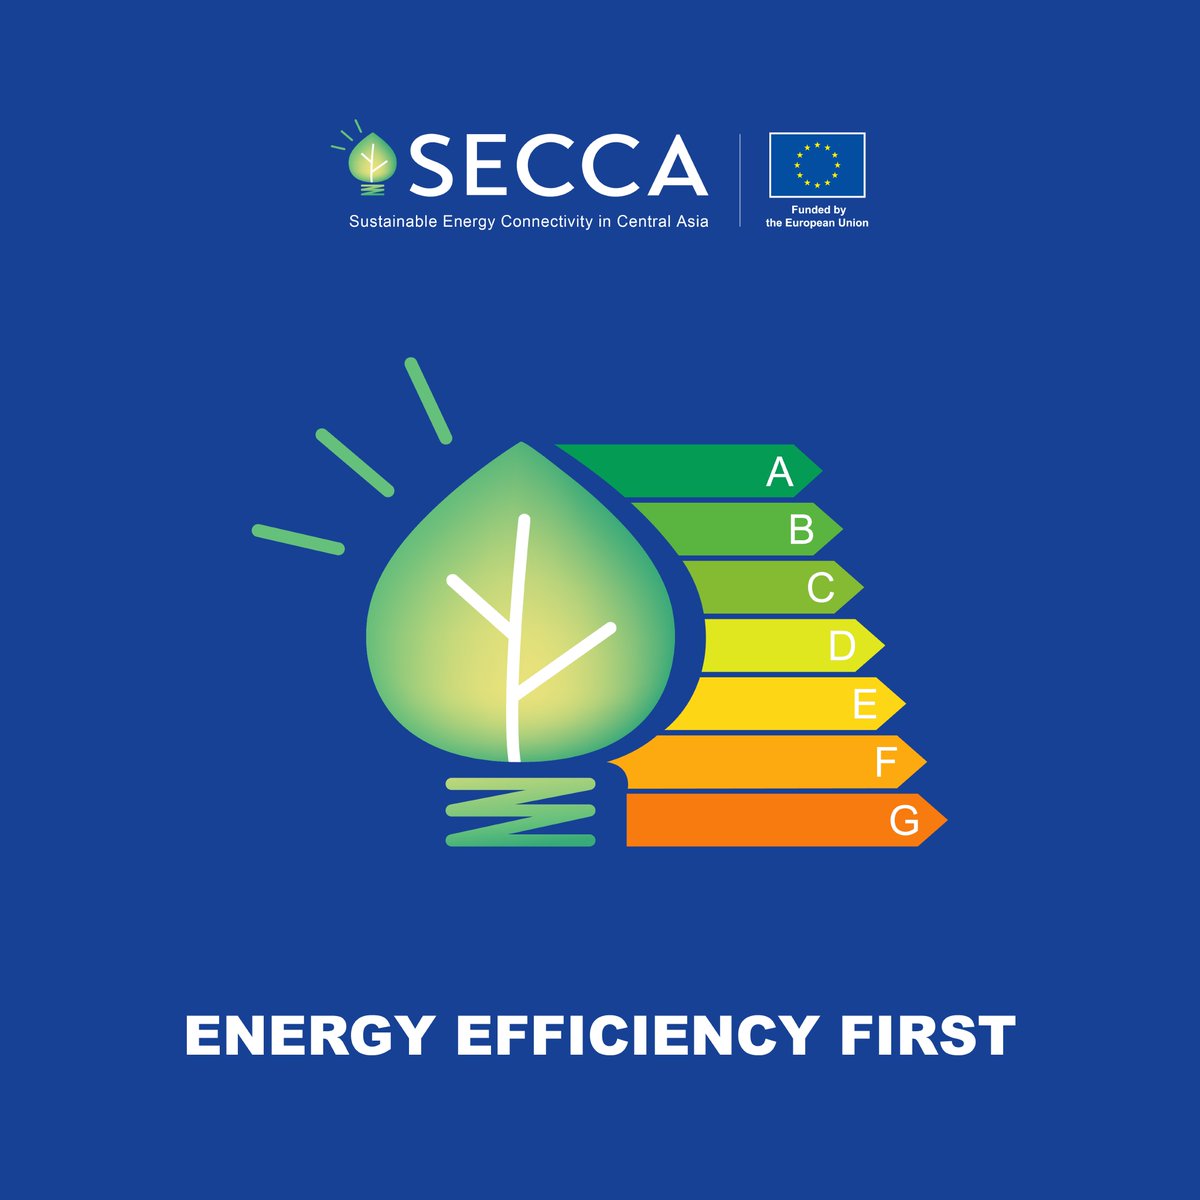 It is #WorldEnergyEfficiencyDay!⚡ Today, we spread the word about #EnergyEfficiency, its benefits, and what we can do to start using energy more efficiently. 💡Read our new article: secca.eu/world-energy-e… #EnergyEfficiencyFirst